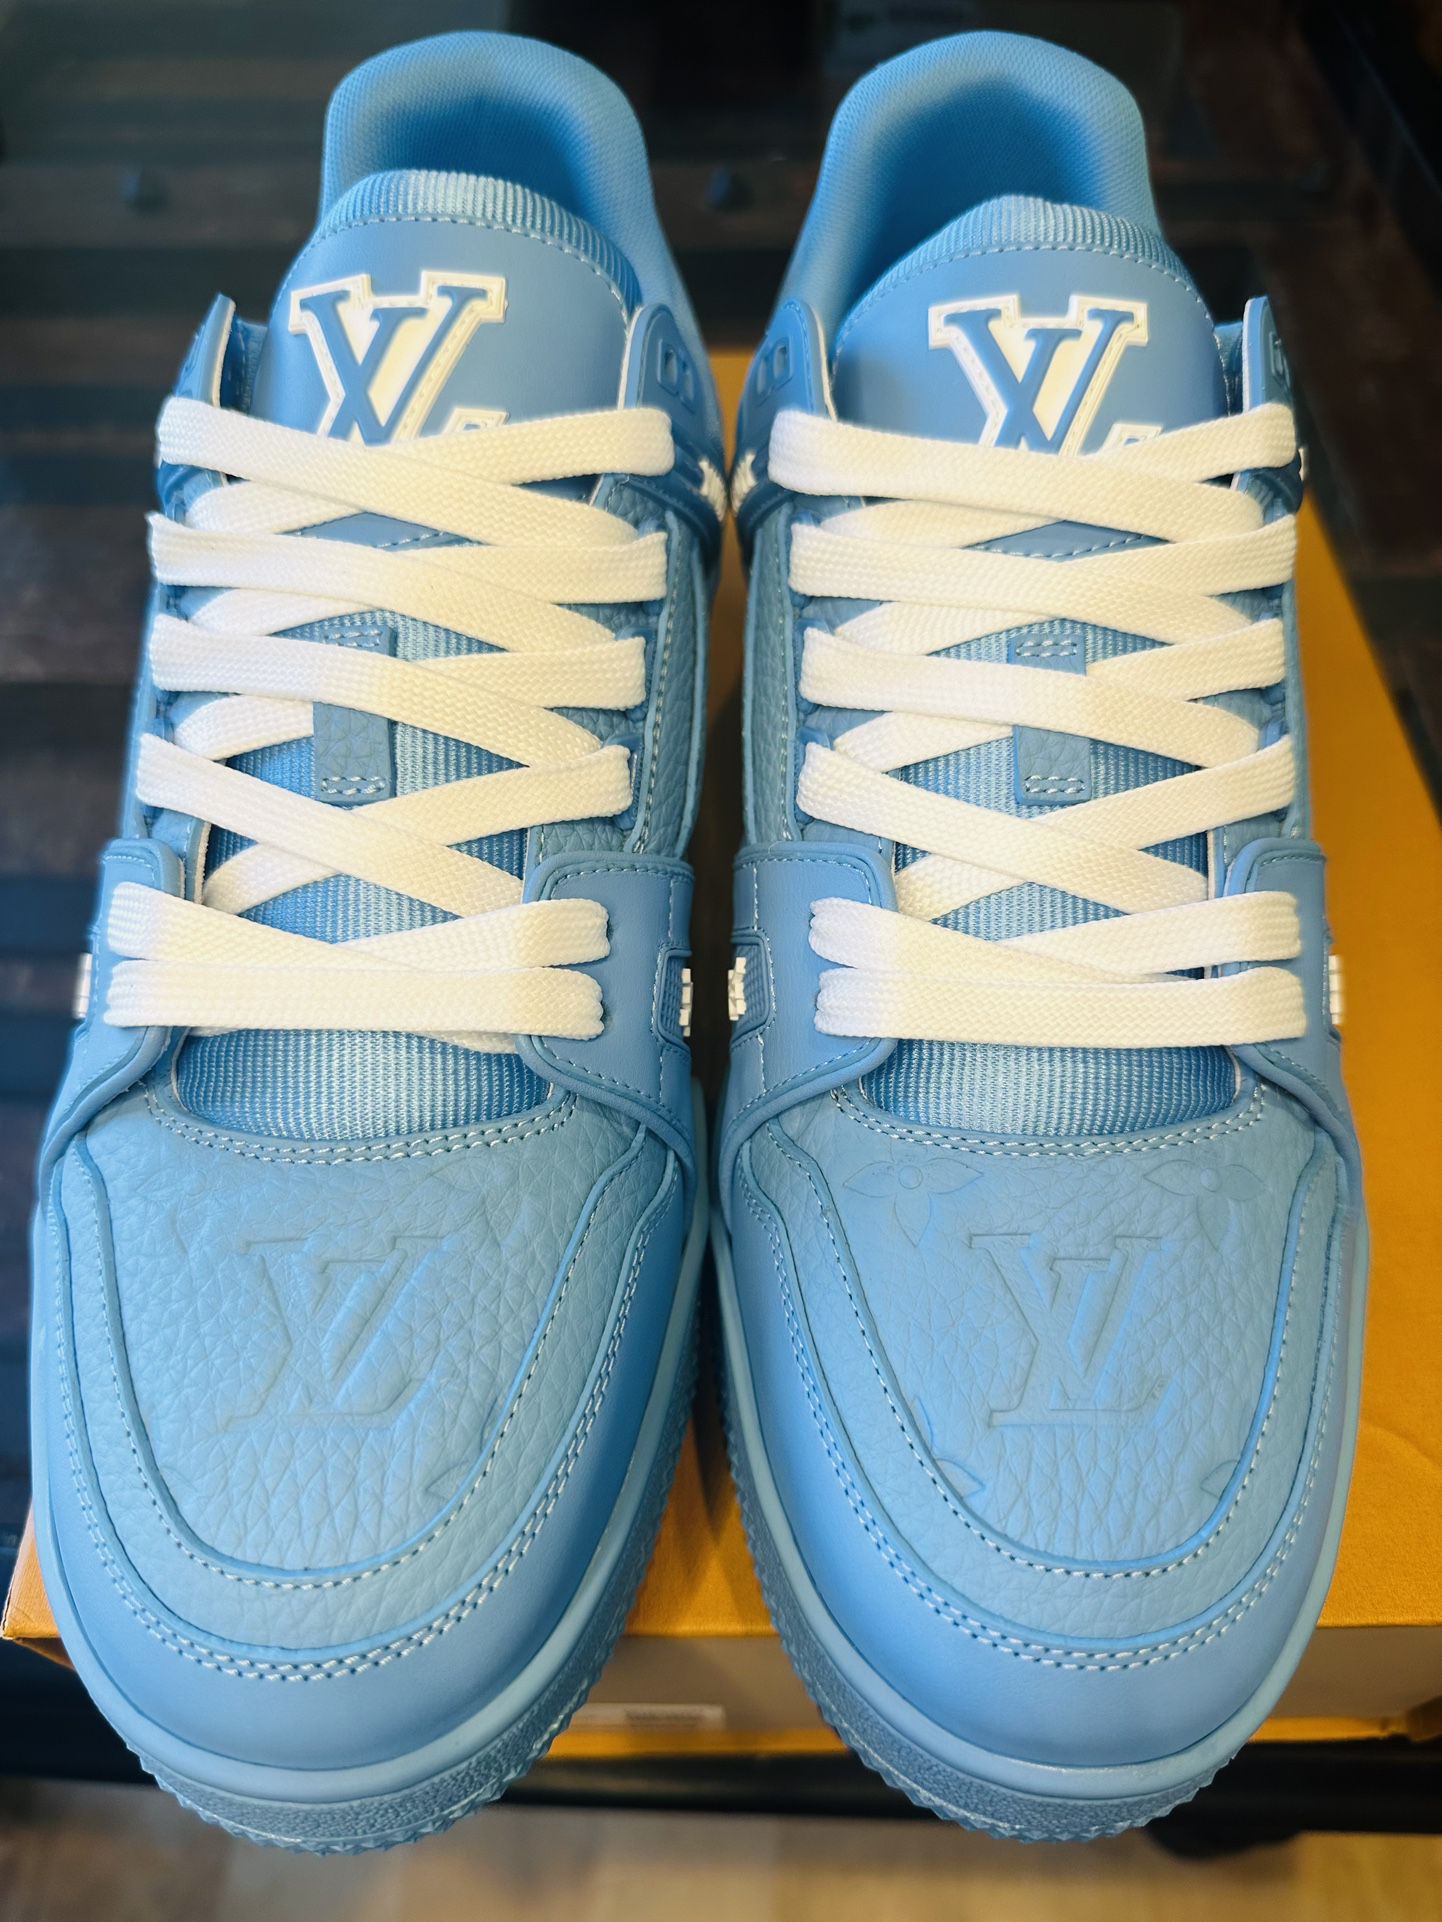 Louis Vuitton Show Up Logo-embossed Faux-leather Trainers in Blue for Men